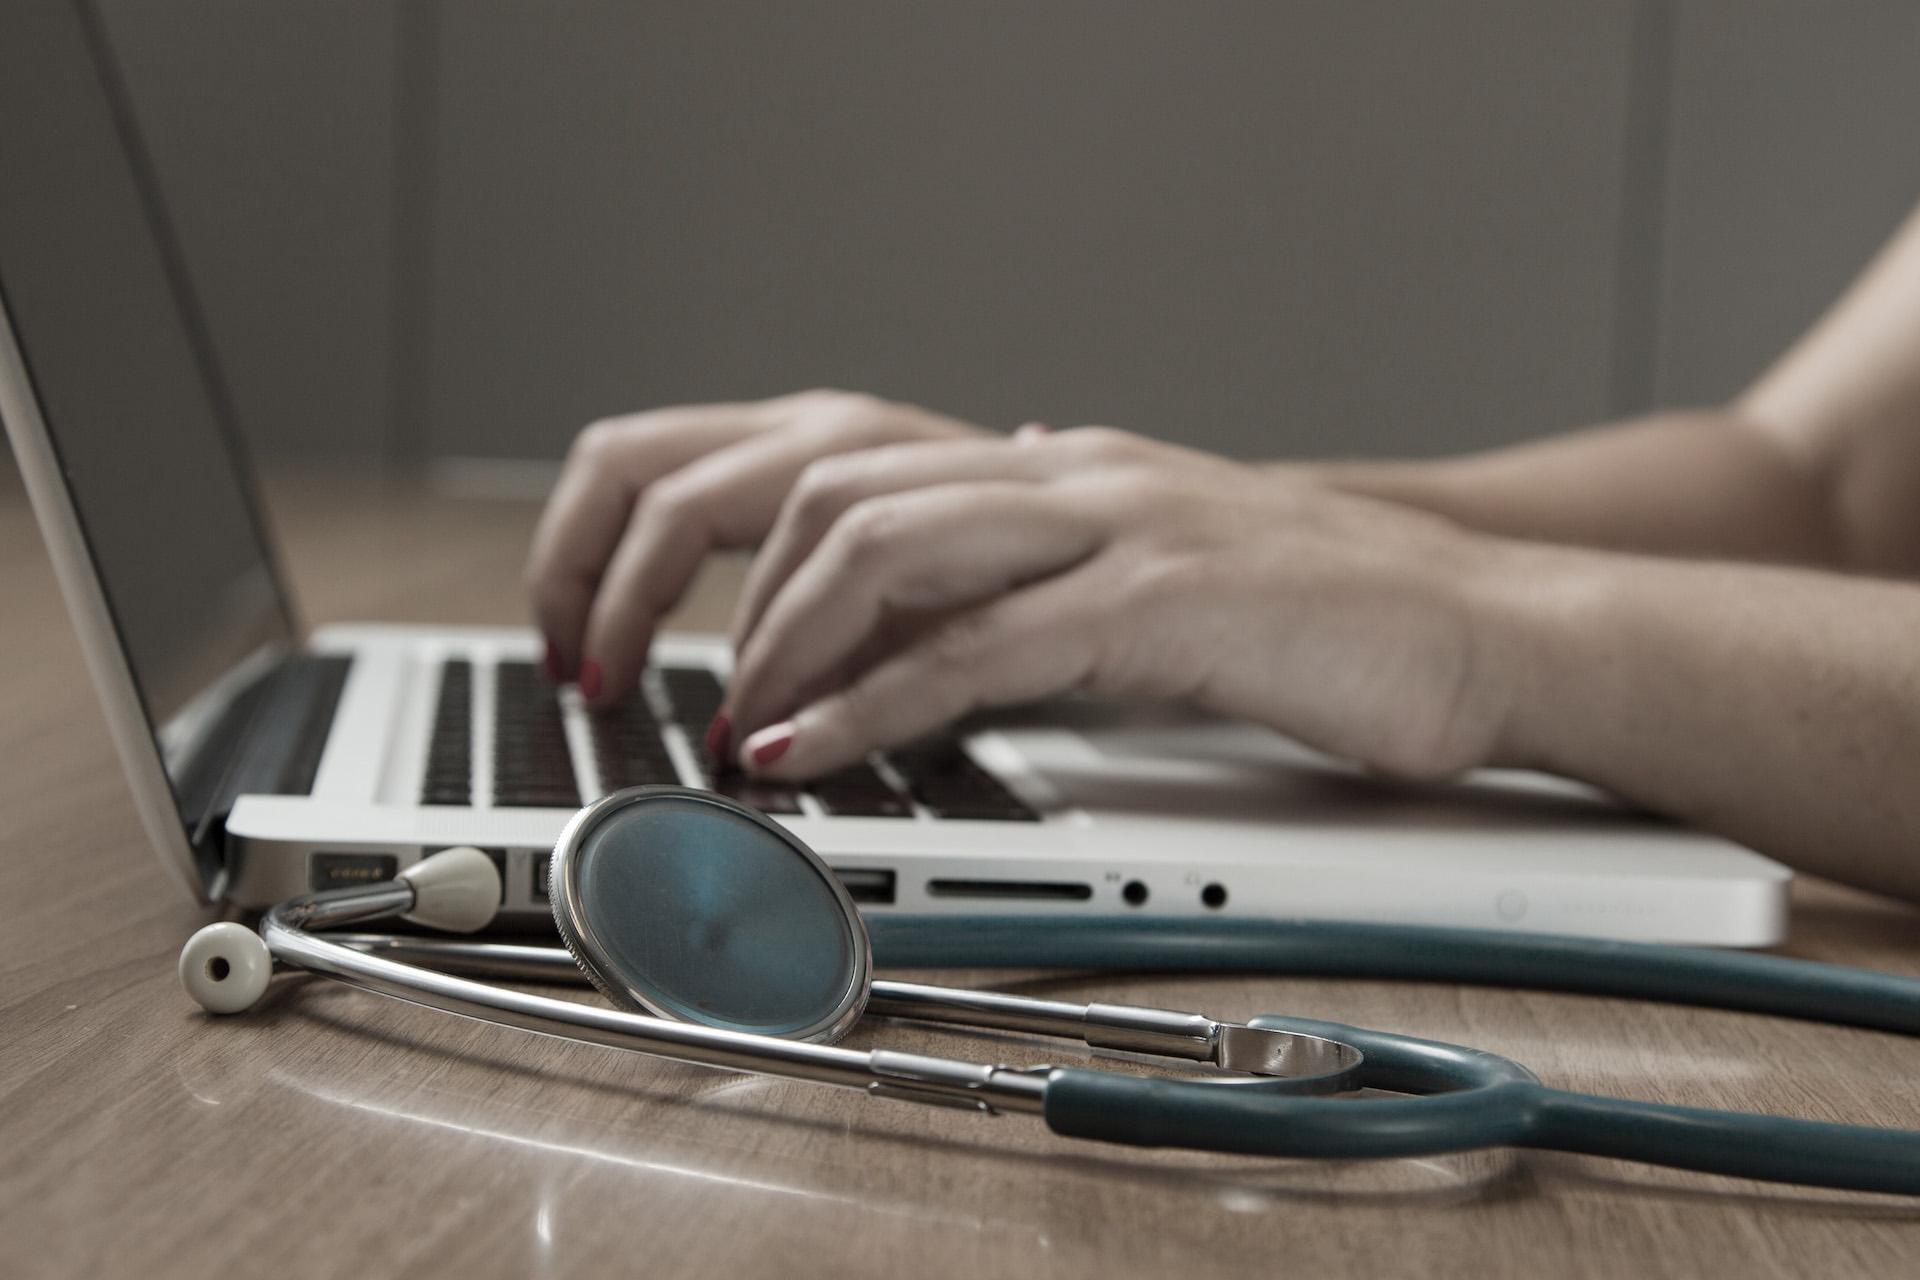 Hands type at a laptop while a stethoscope lays beside